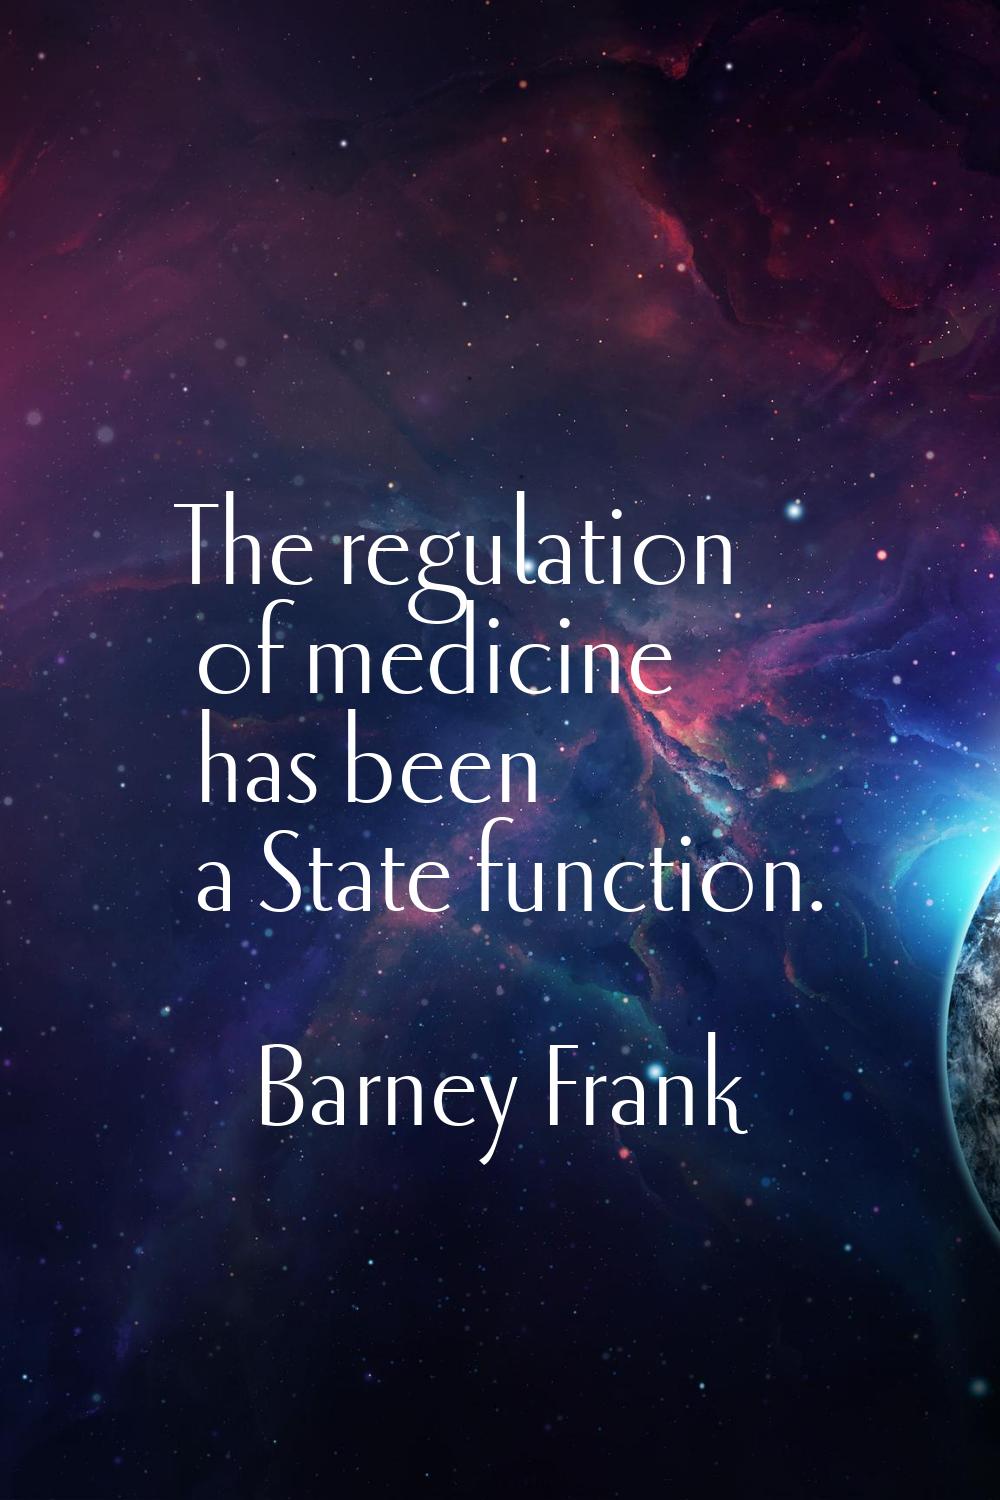 The regulation of medicine has been a State function.